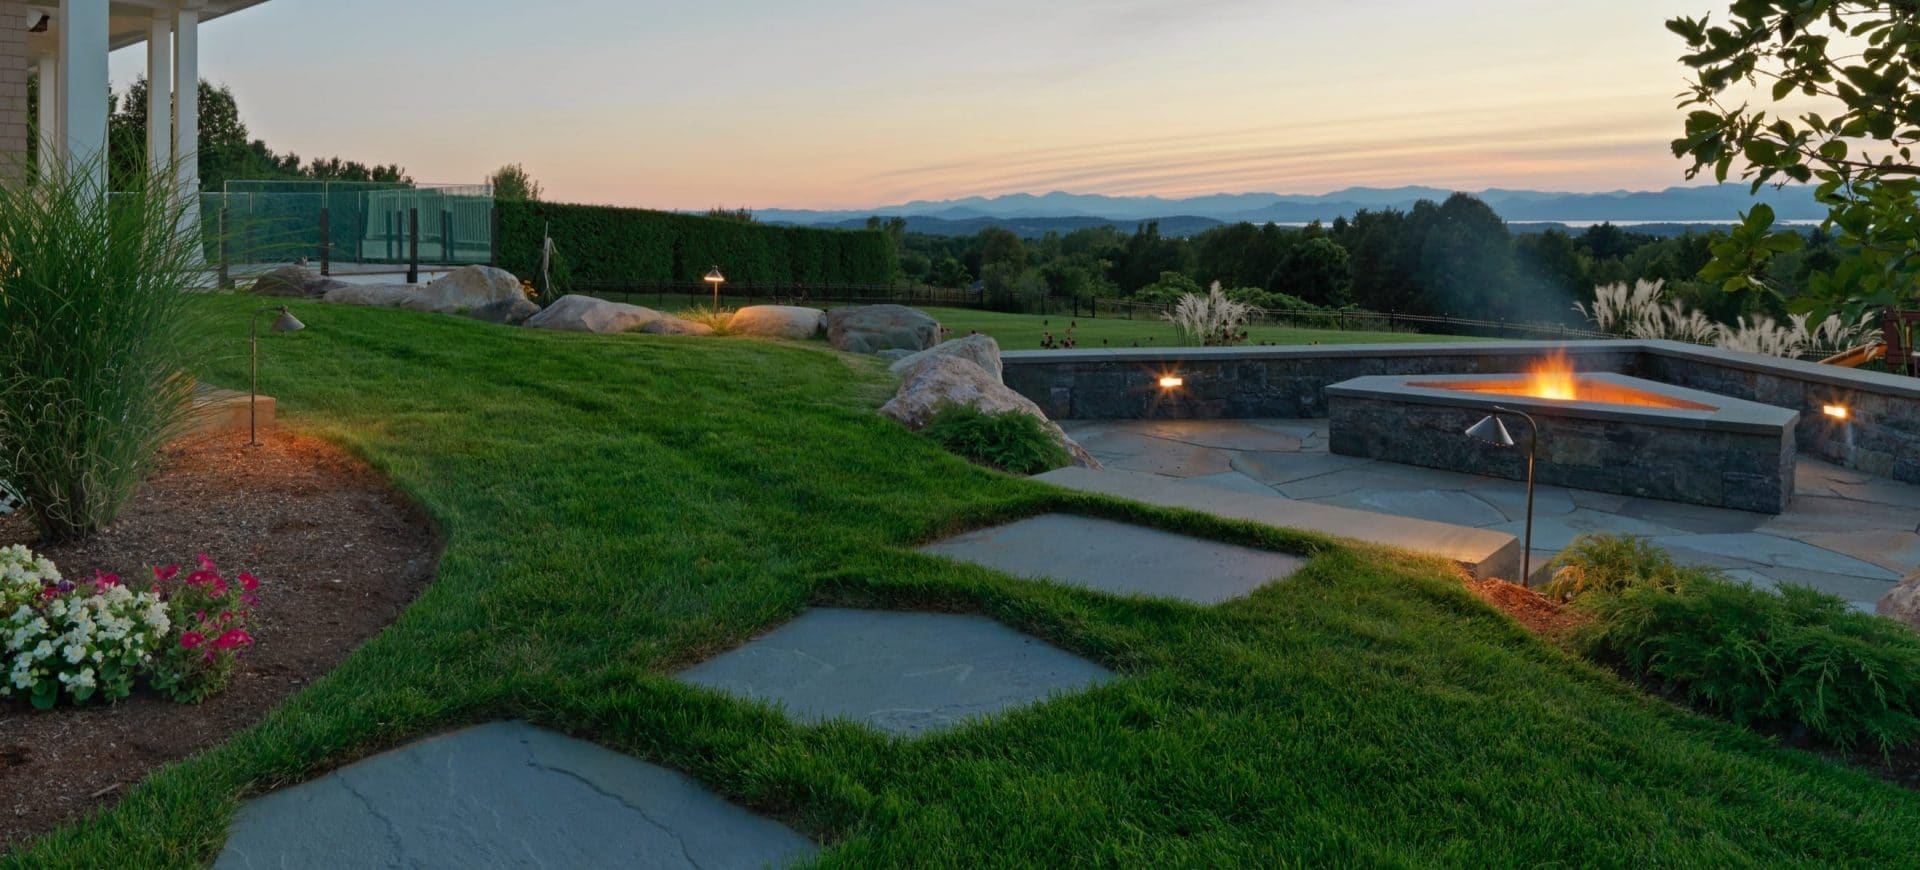 Enhance Your Home’s Beauty with Professional Residential Landscape Design Services